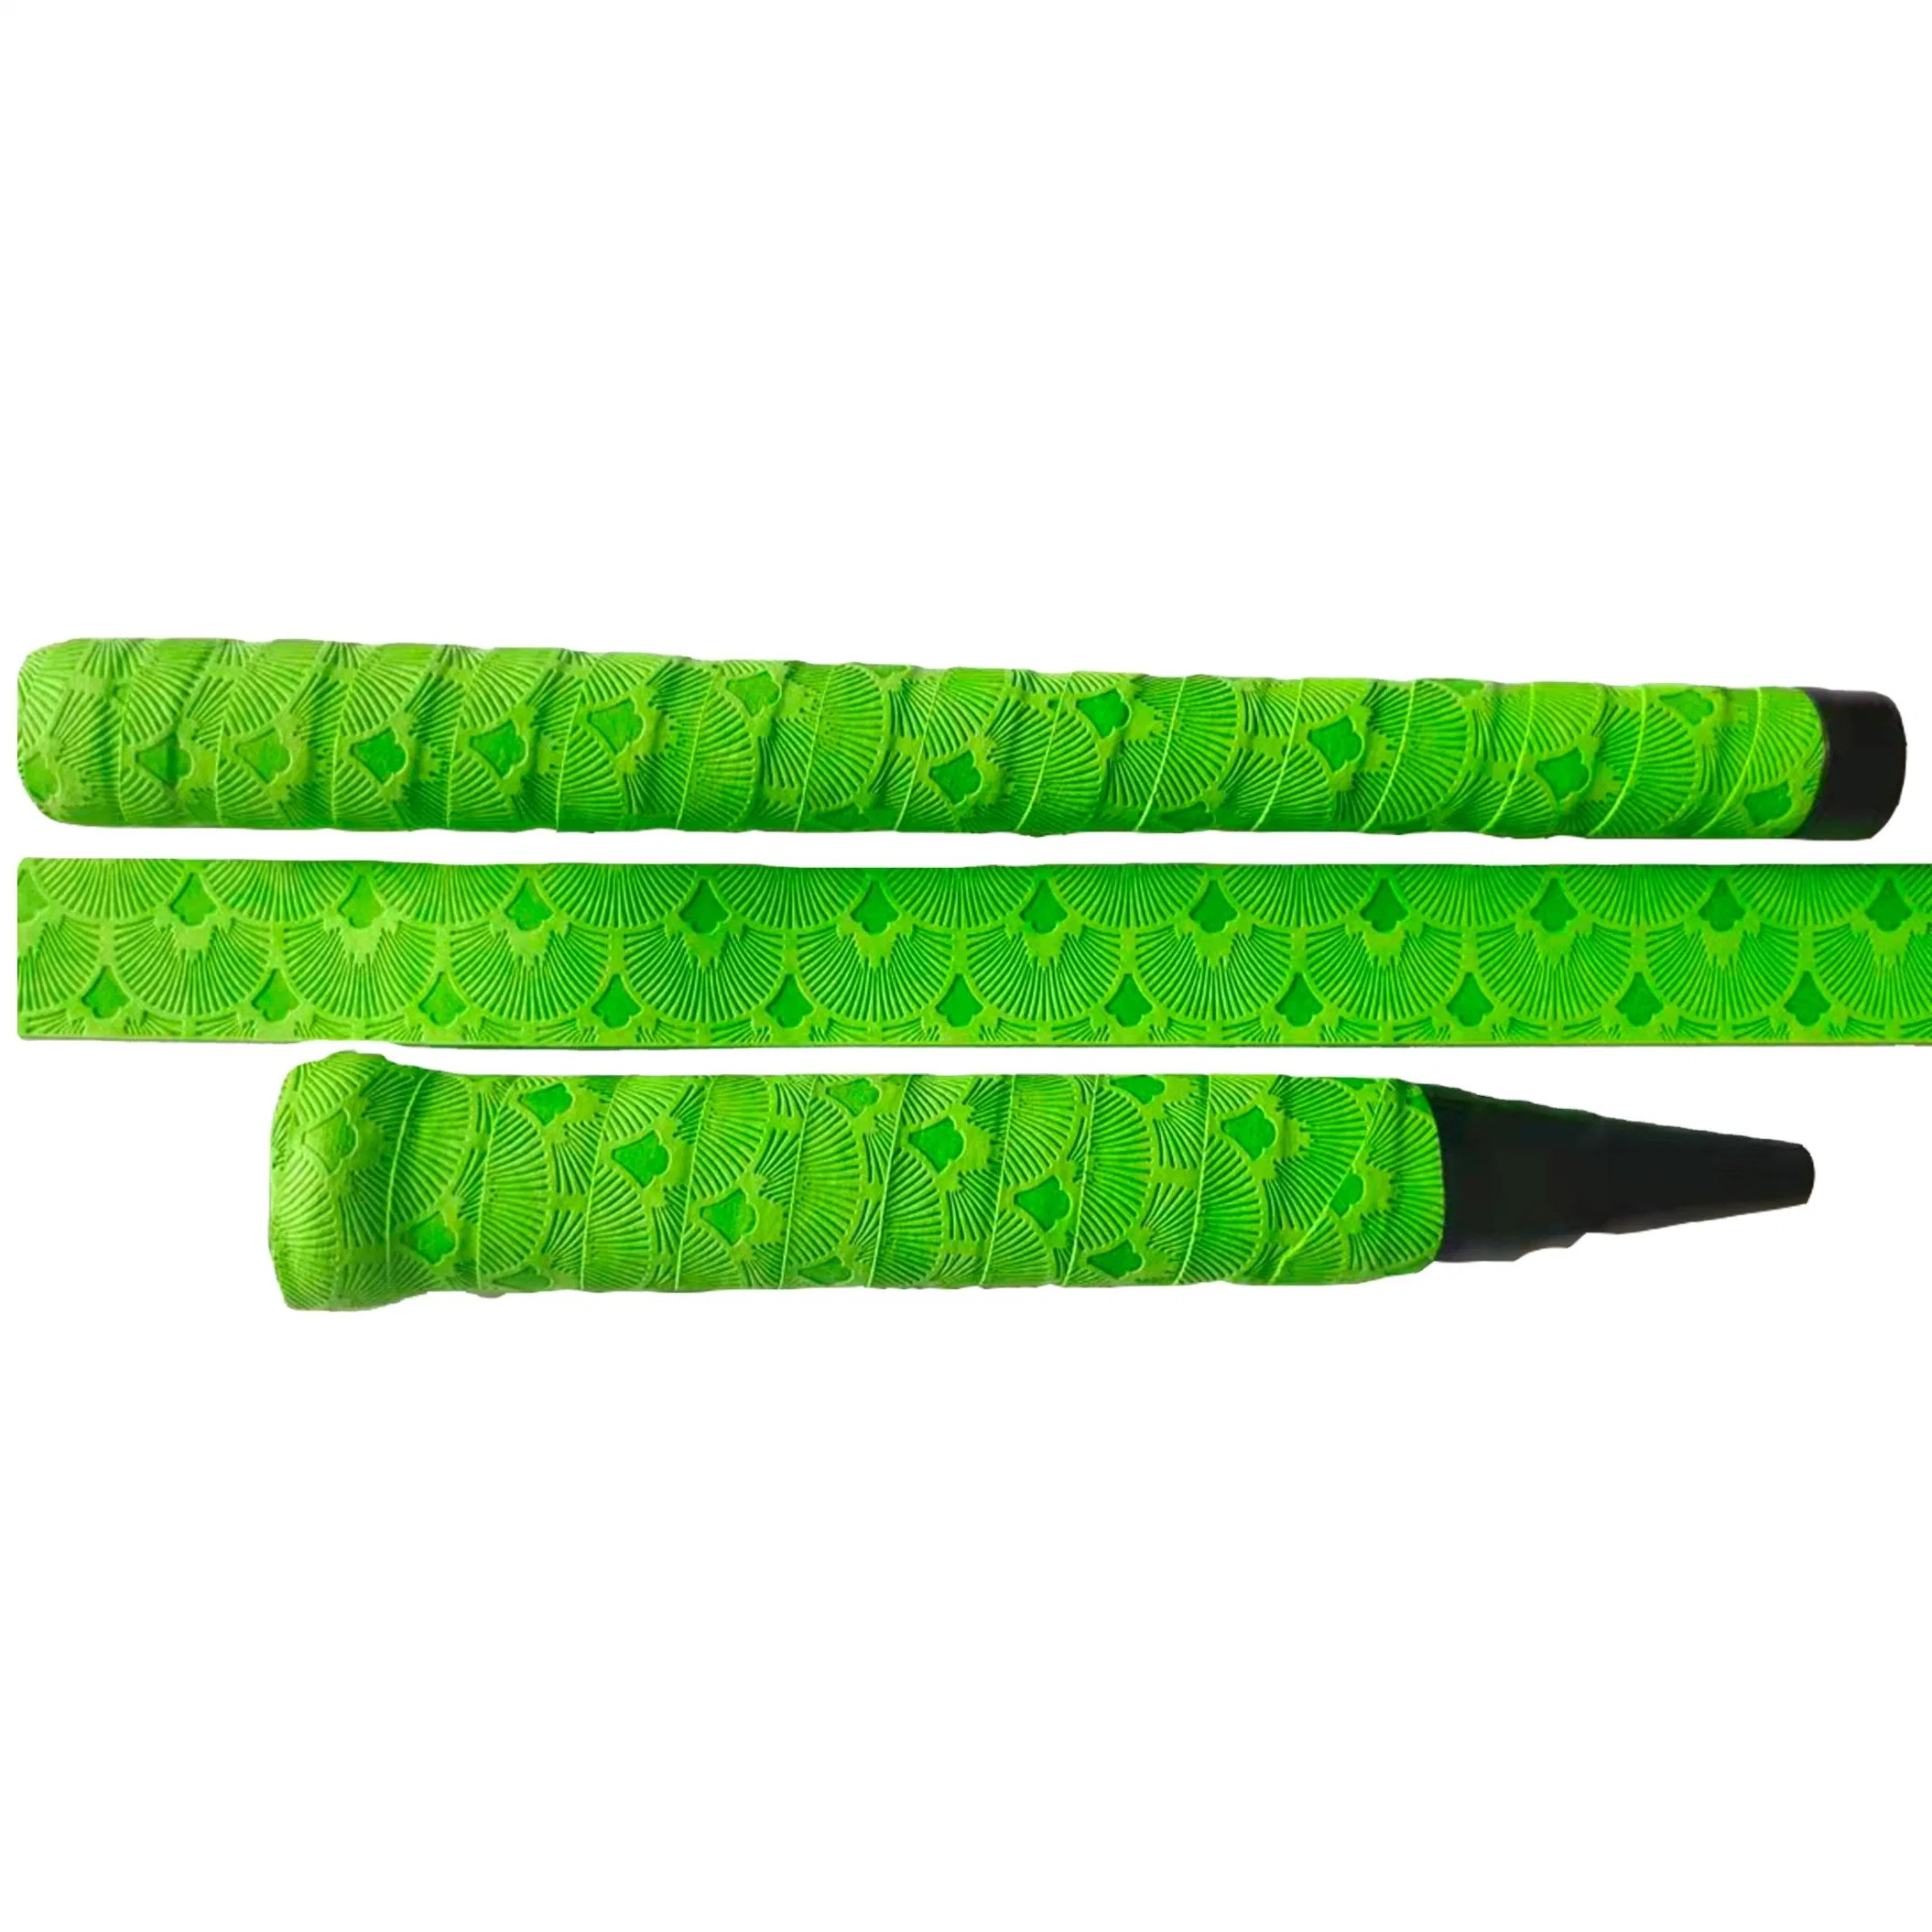 Customized Best Quality Table Tennis Overgrip PU Material Grips Anti-Slip Tennis Overgrips